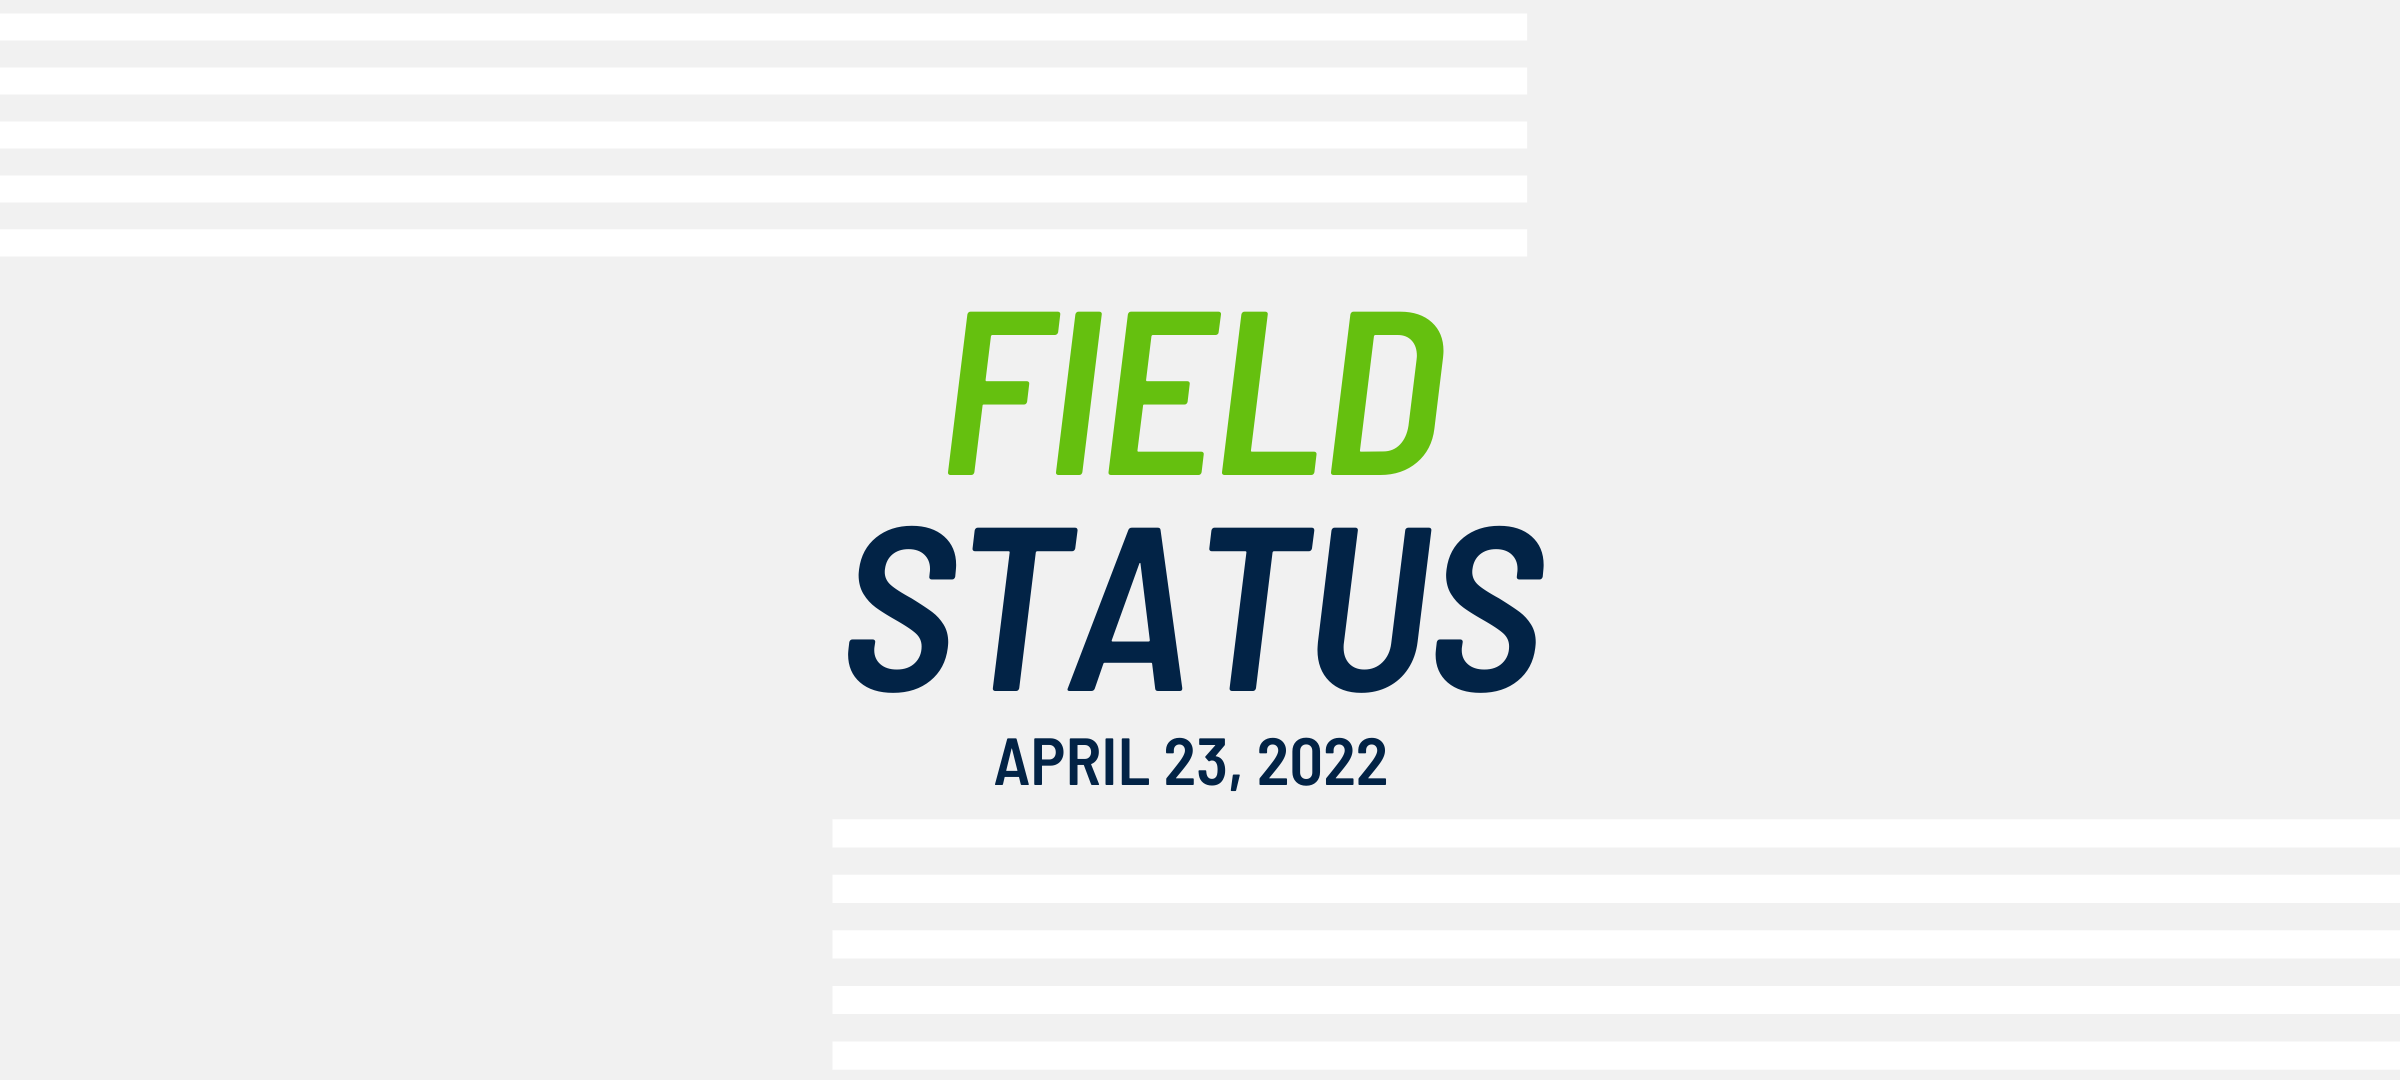 Field Status Update for April 23, 2022